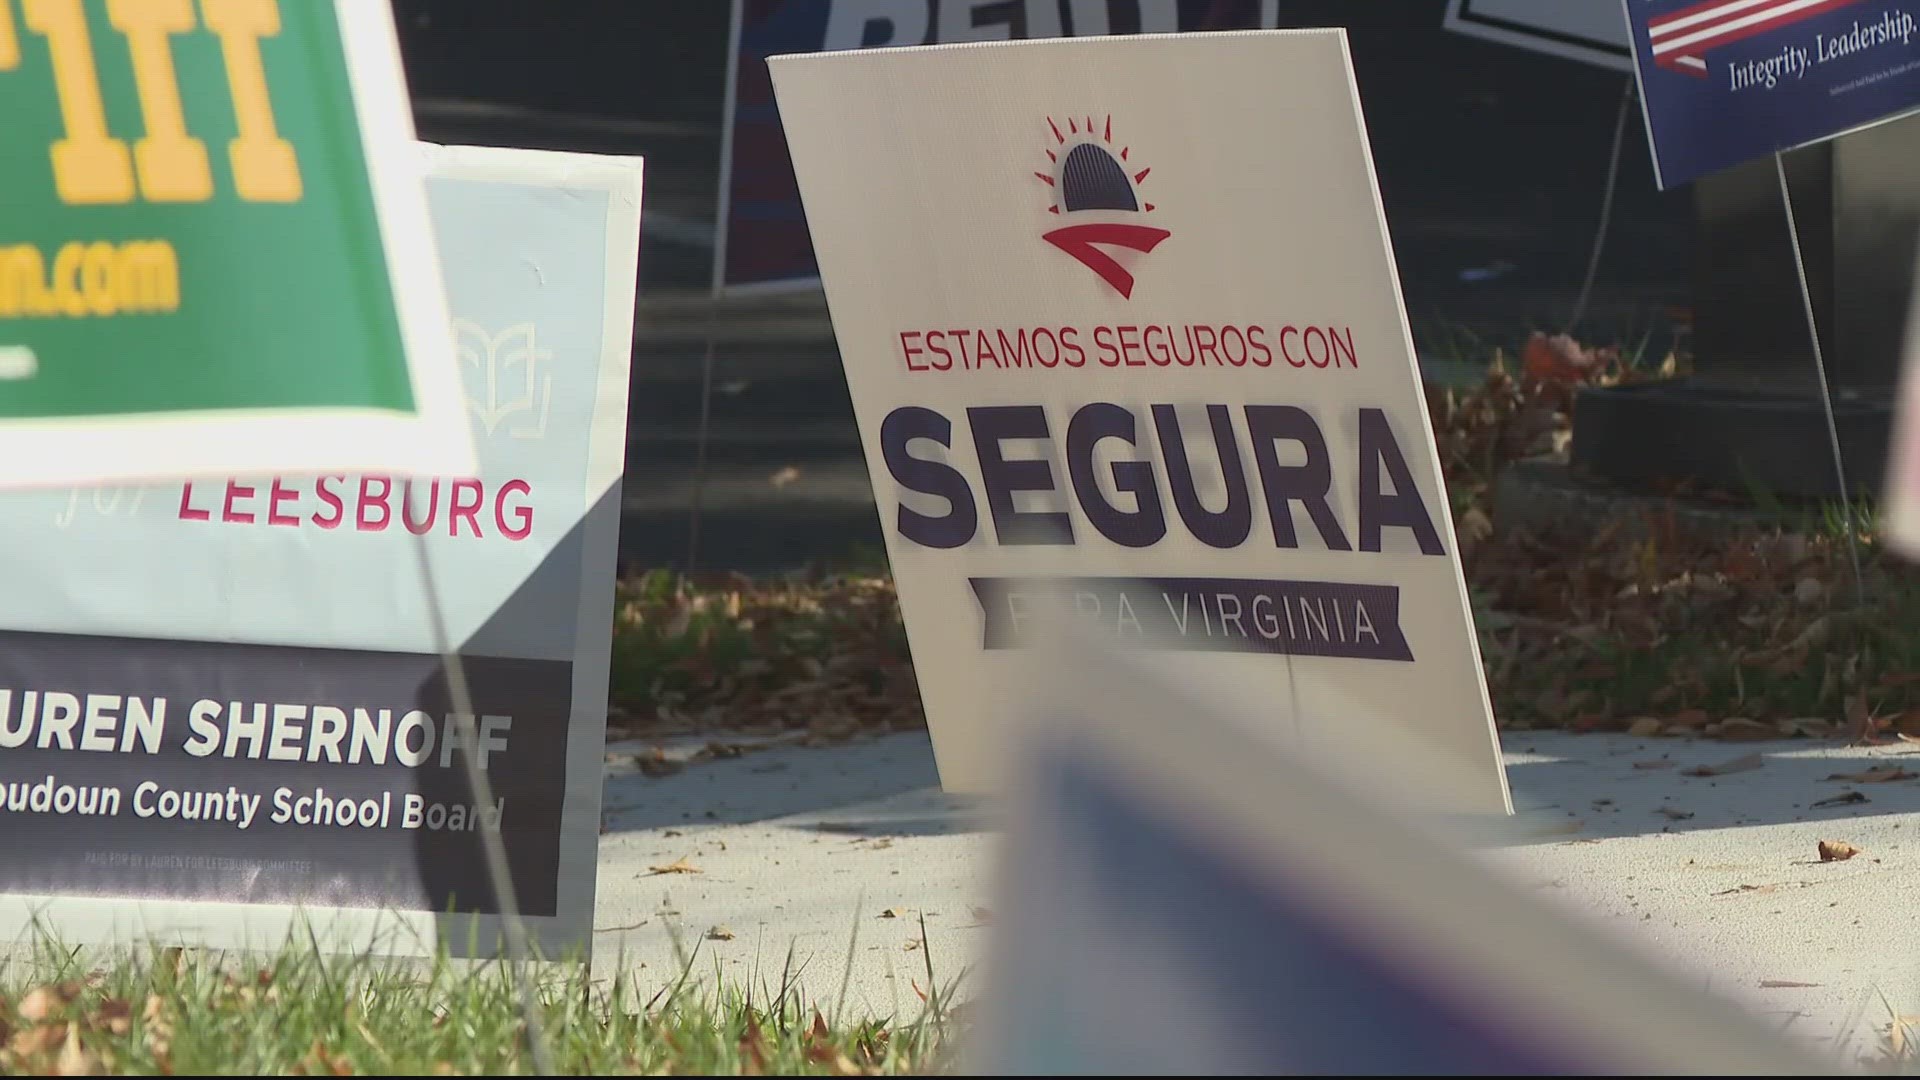 Juan Pablo Segura claims he wouldn't ban abortions in Virginia, but his opponents say that's misleading.